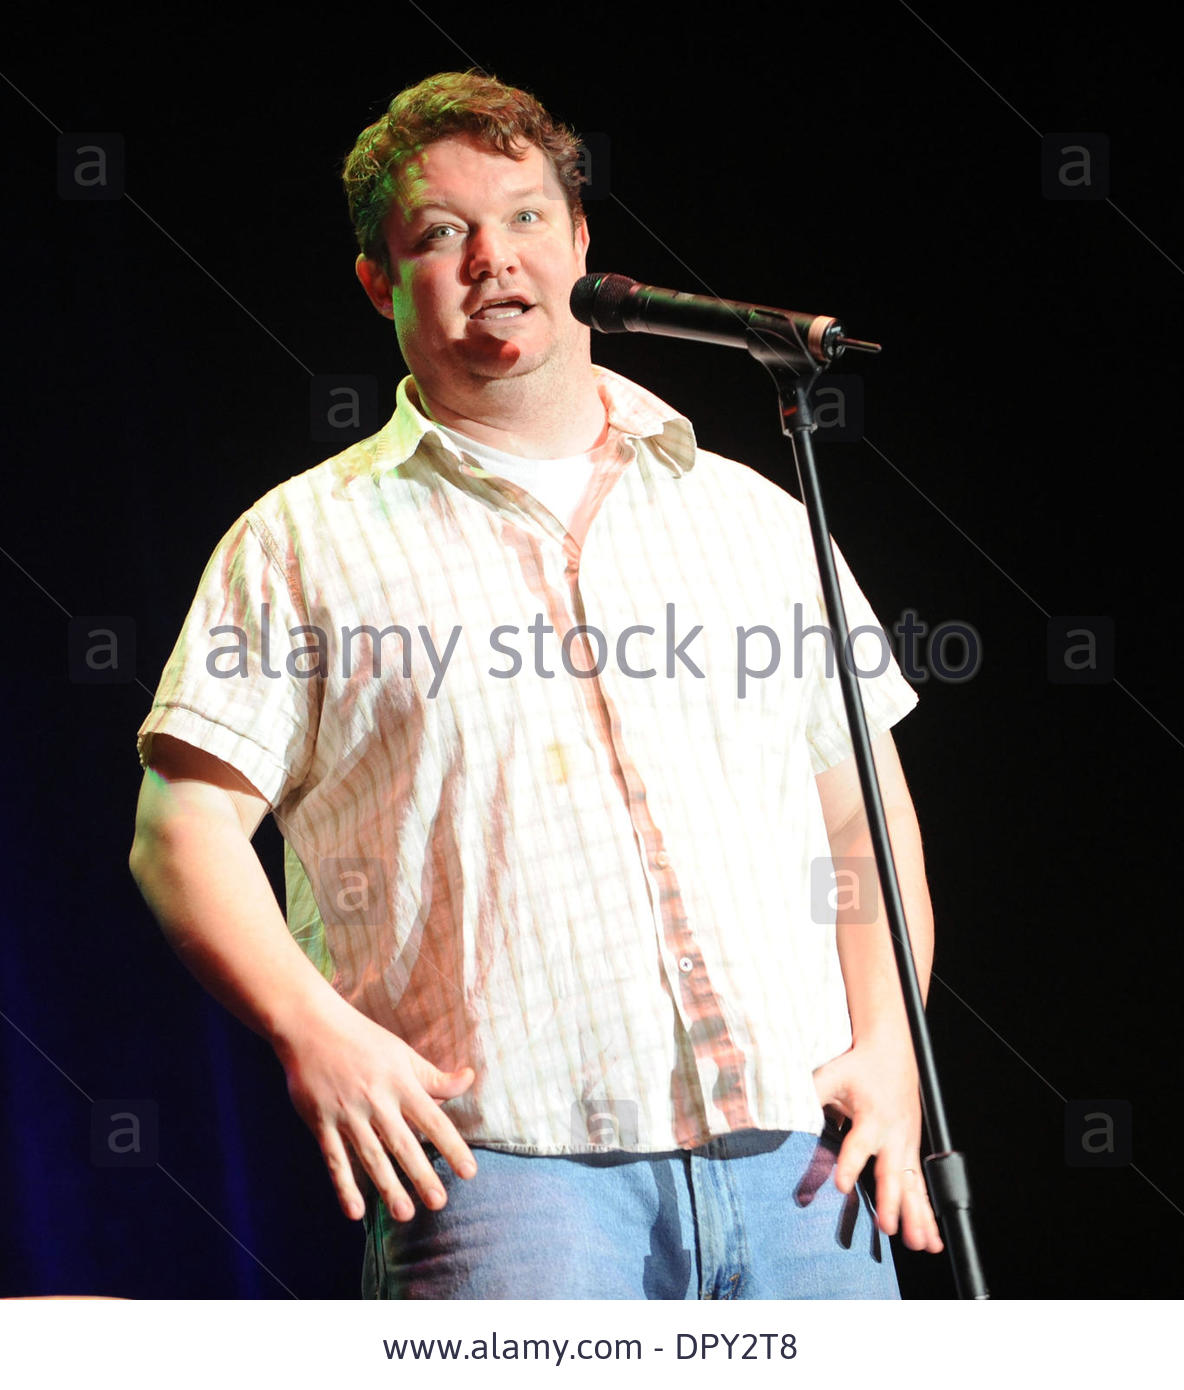 images-of-reno-comedian